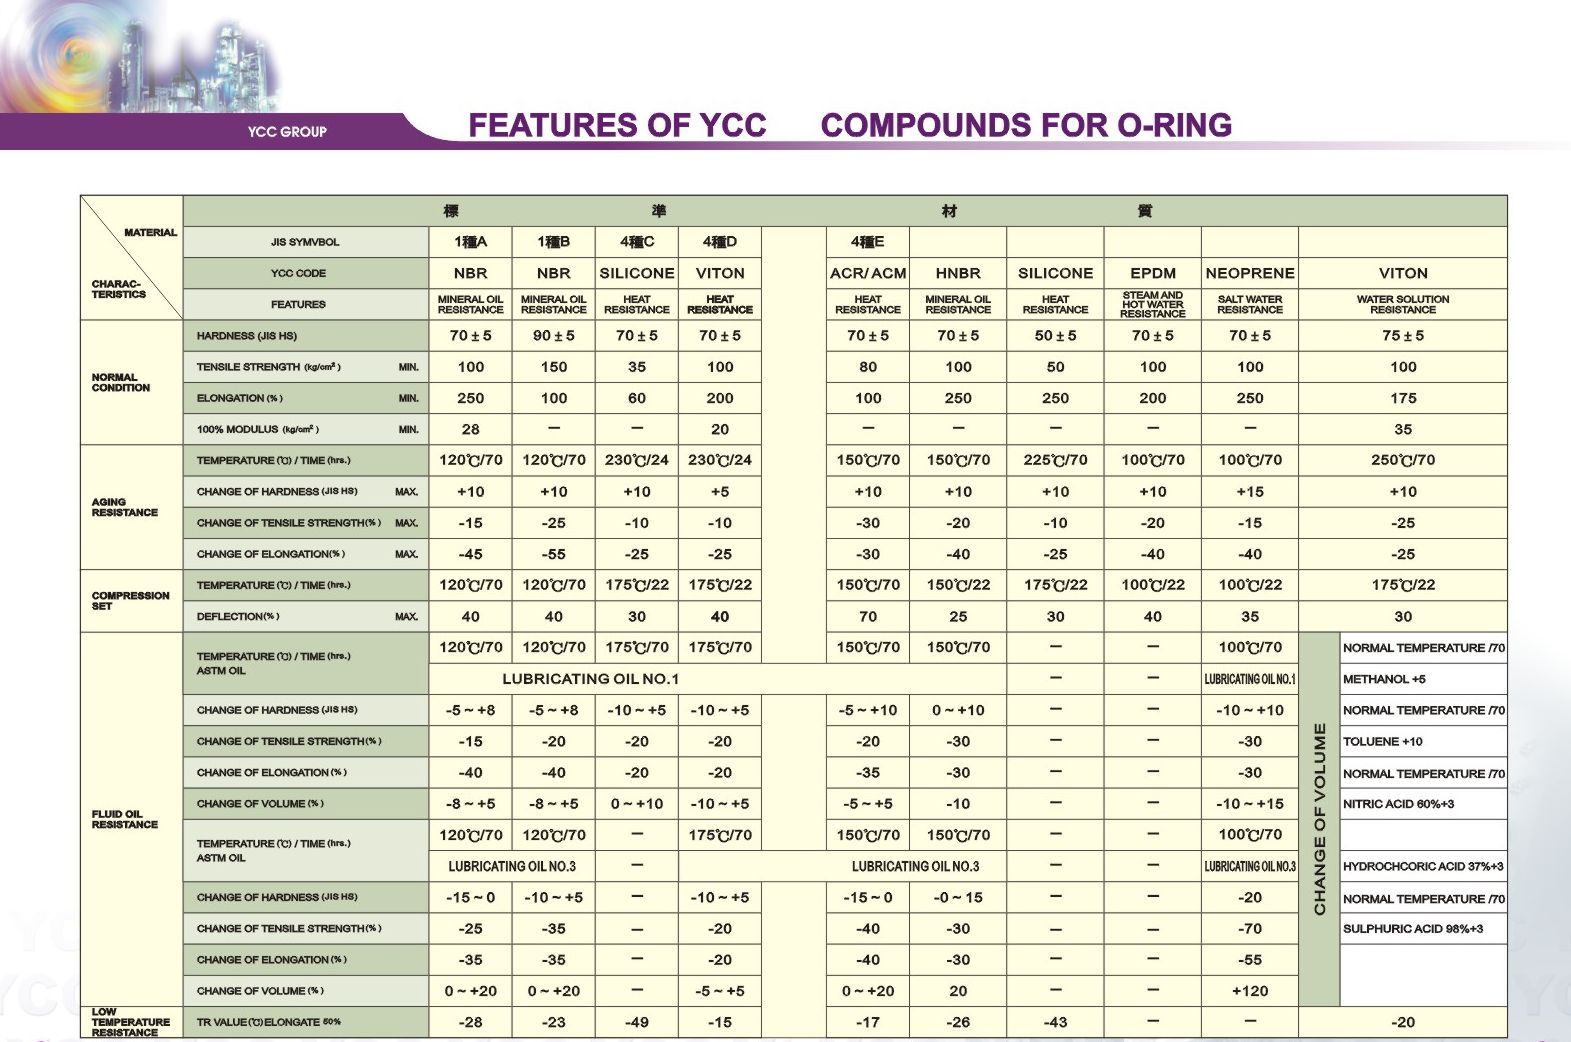 Features of YCCs Compounds for O-Ring